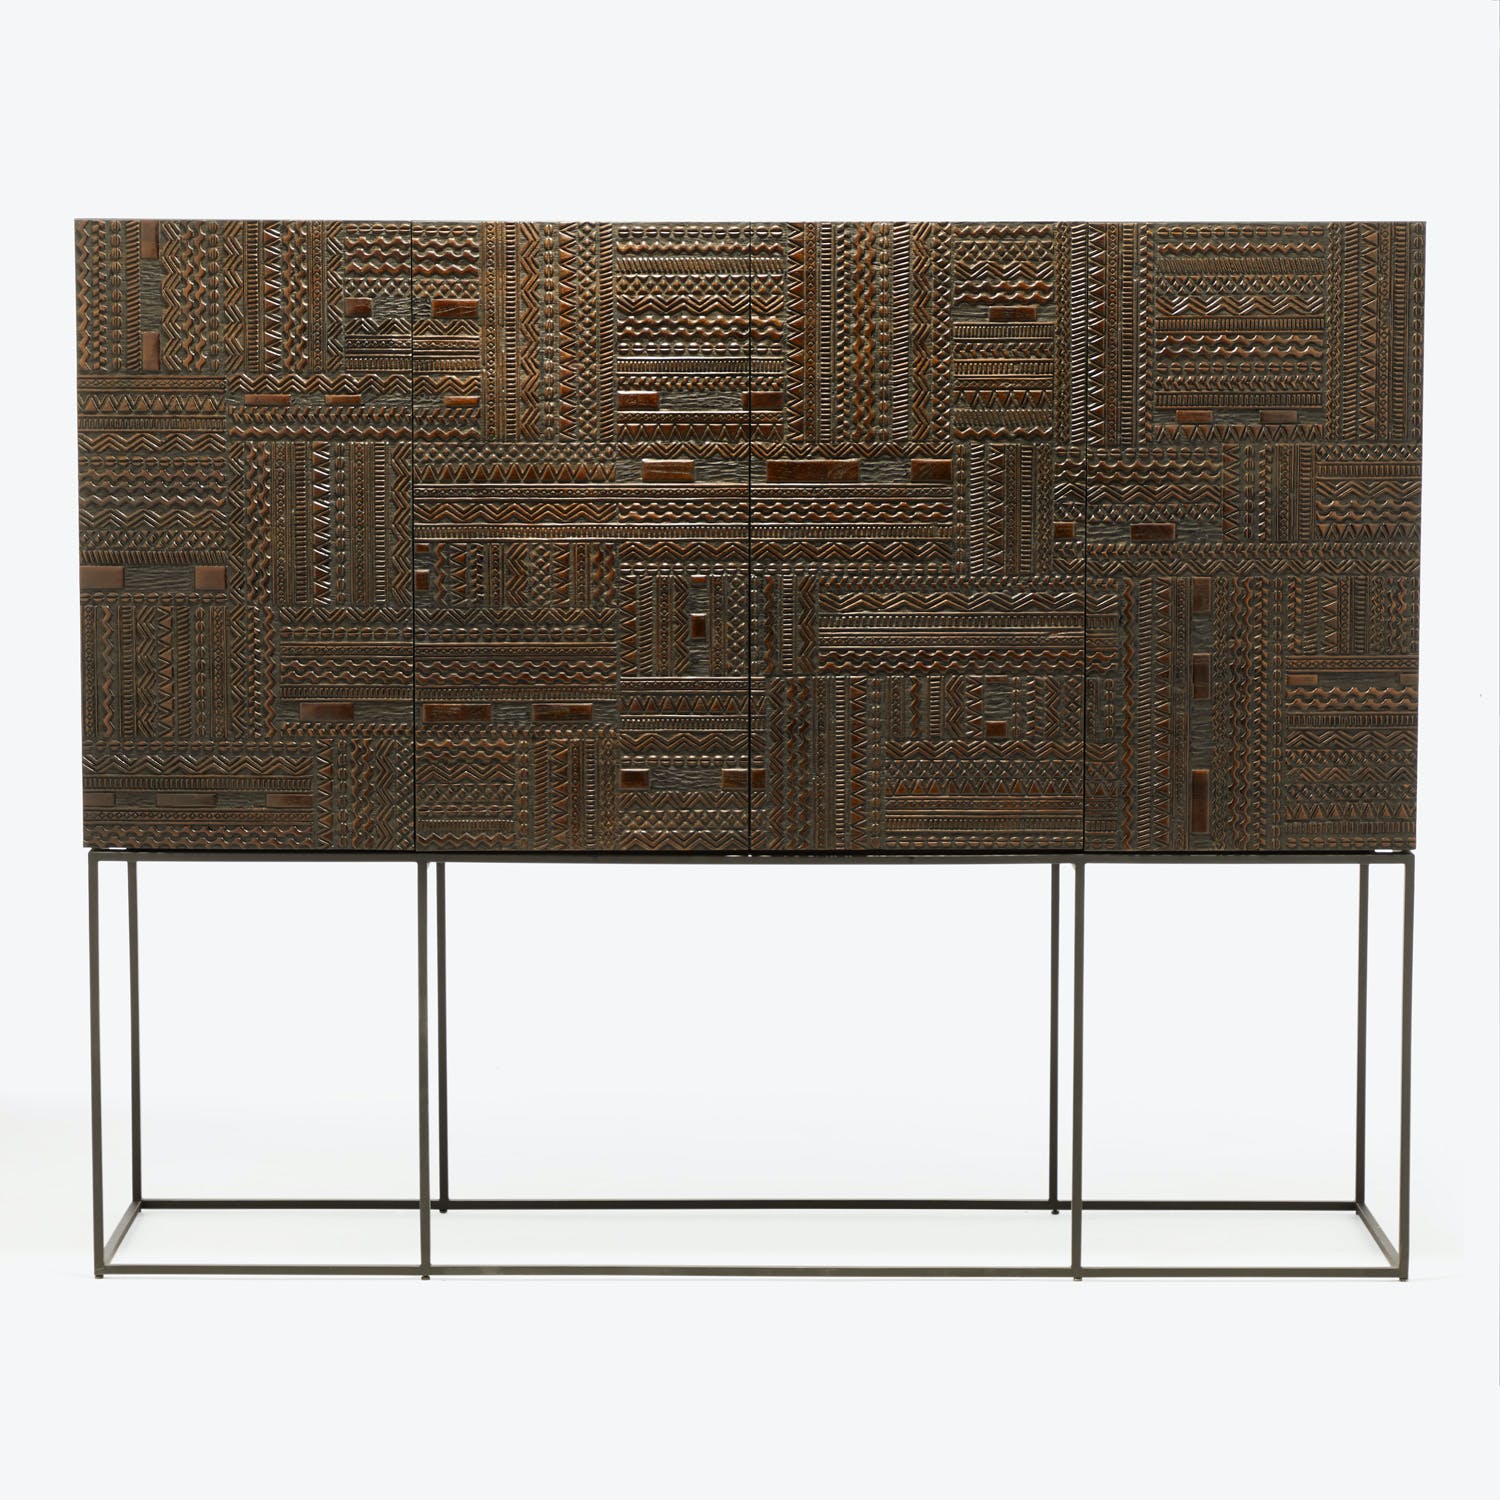 Handcrafted wooden cabinet with geometric textured surface on sleek metal base